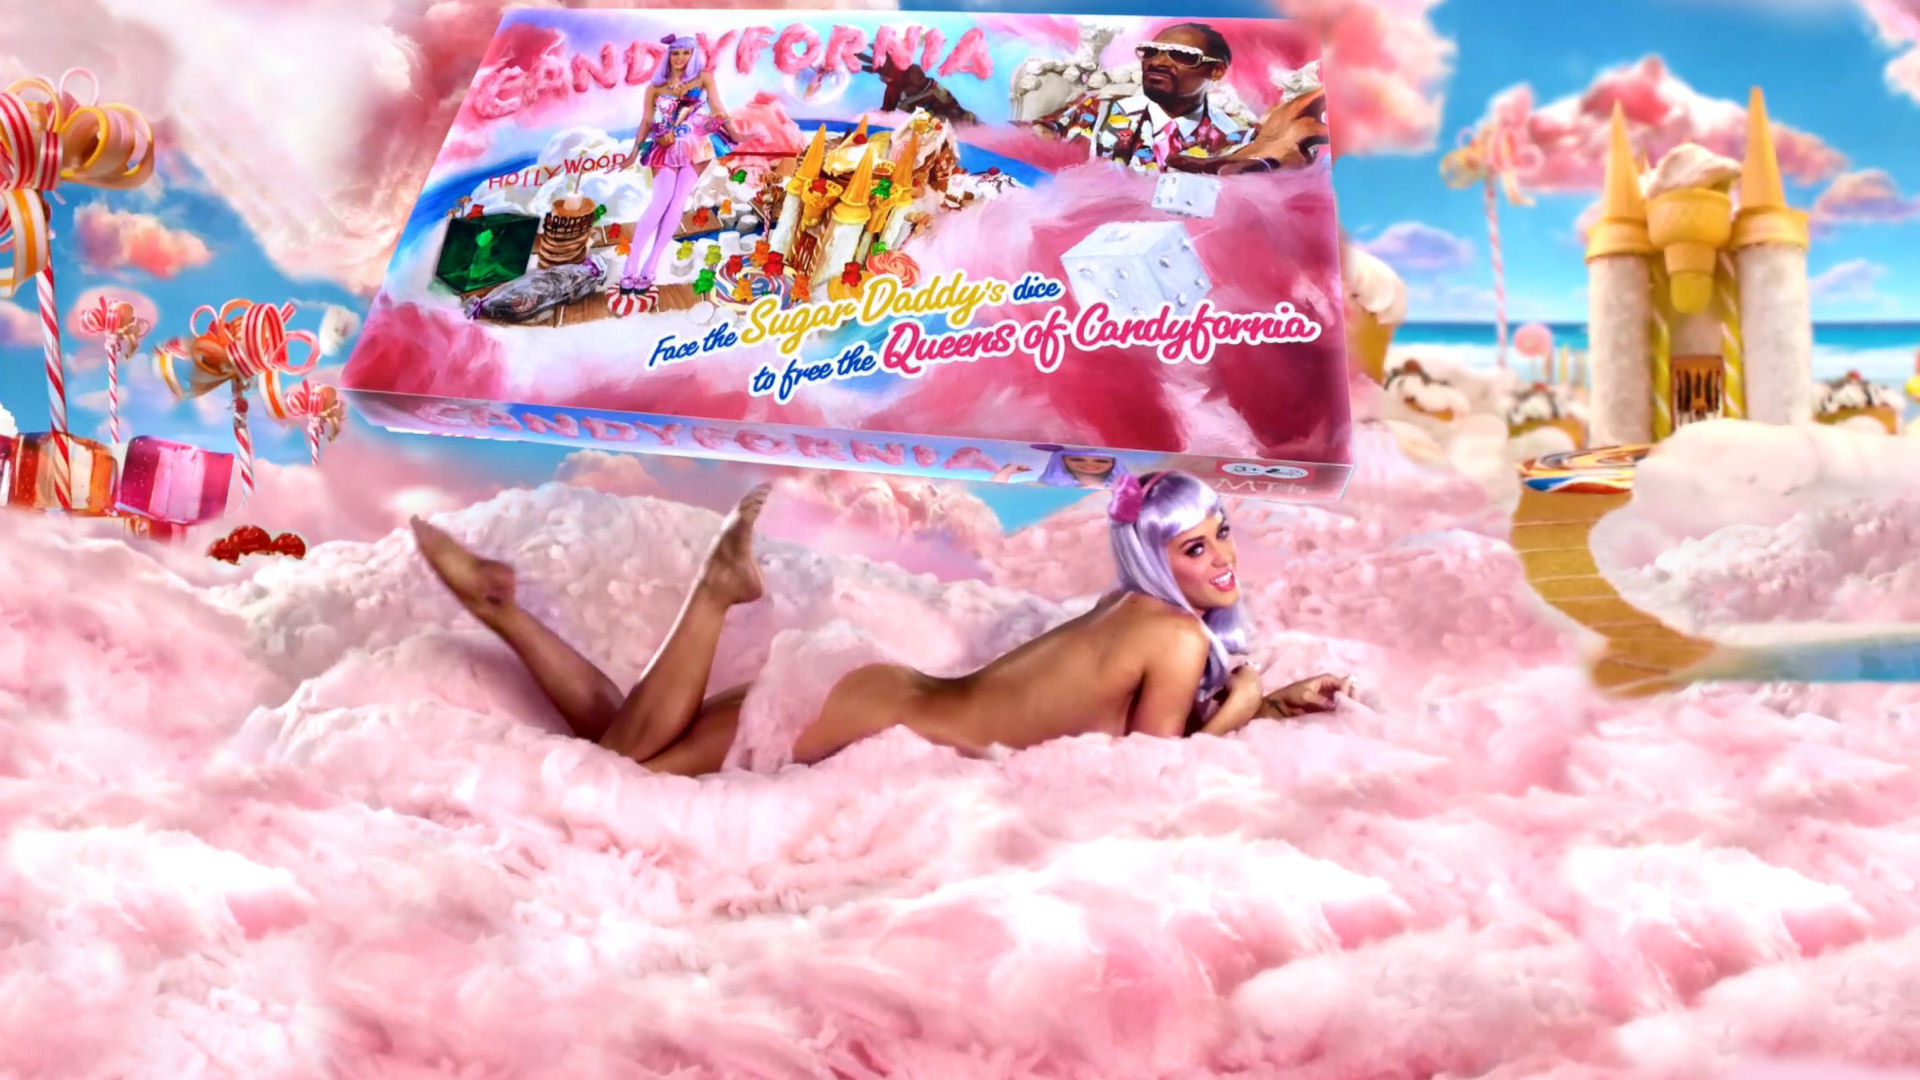 http://images6.fanpop.com/image/photos/34900000/Katy-Perry-California-Gurls-Featuring-Snoop-Dogg-katy-perry-34970257-1920-1080.jpg